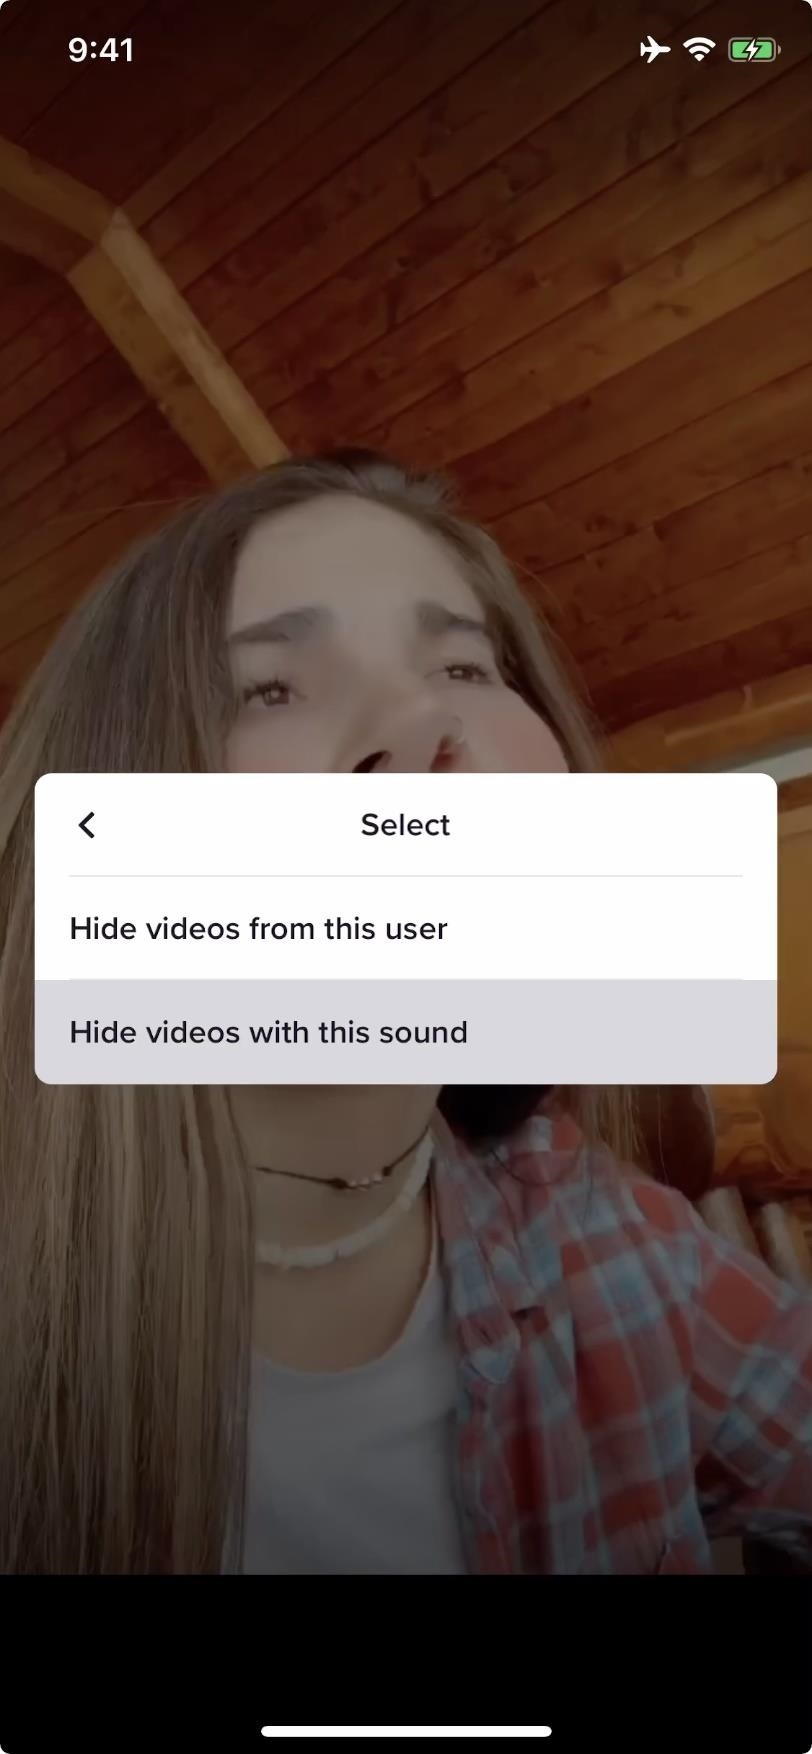 Sick of That One TikTok Trend? You Can Easily Block It from Your Feed